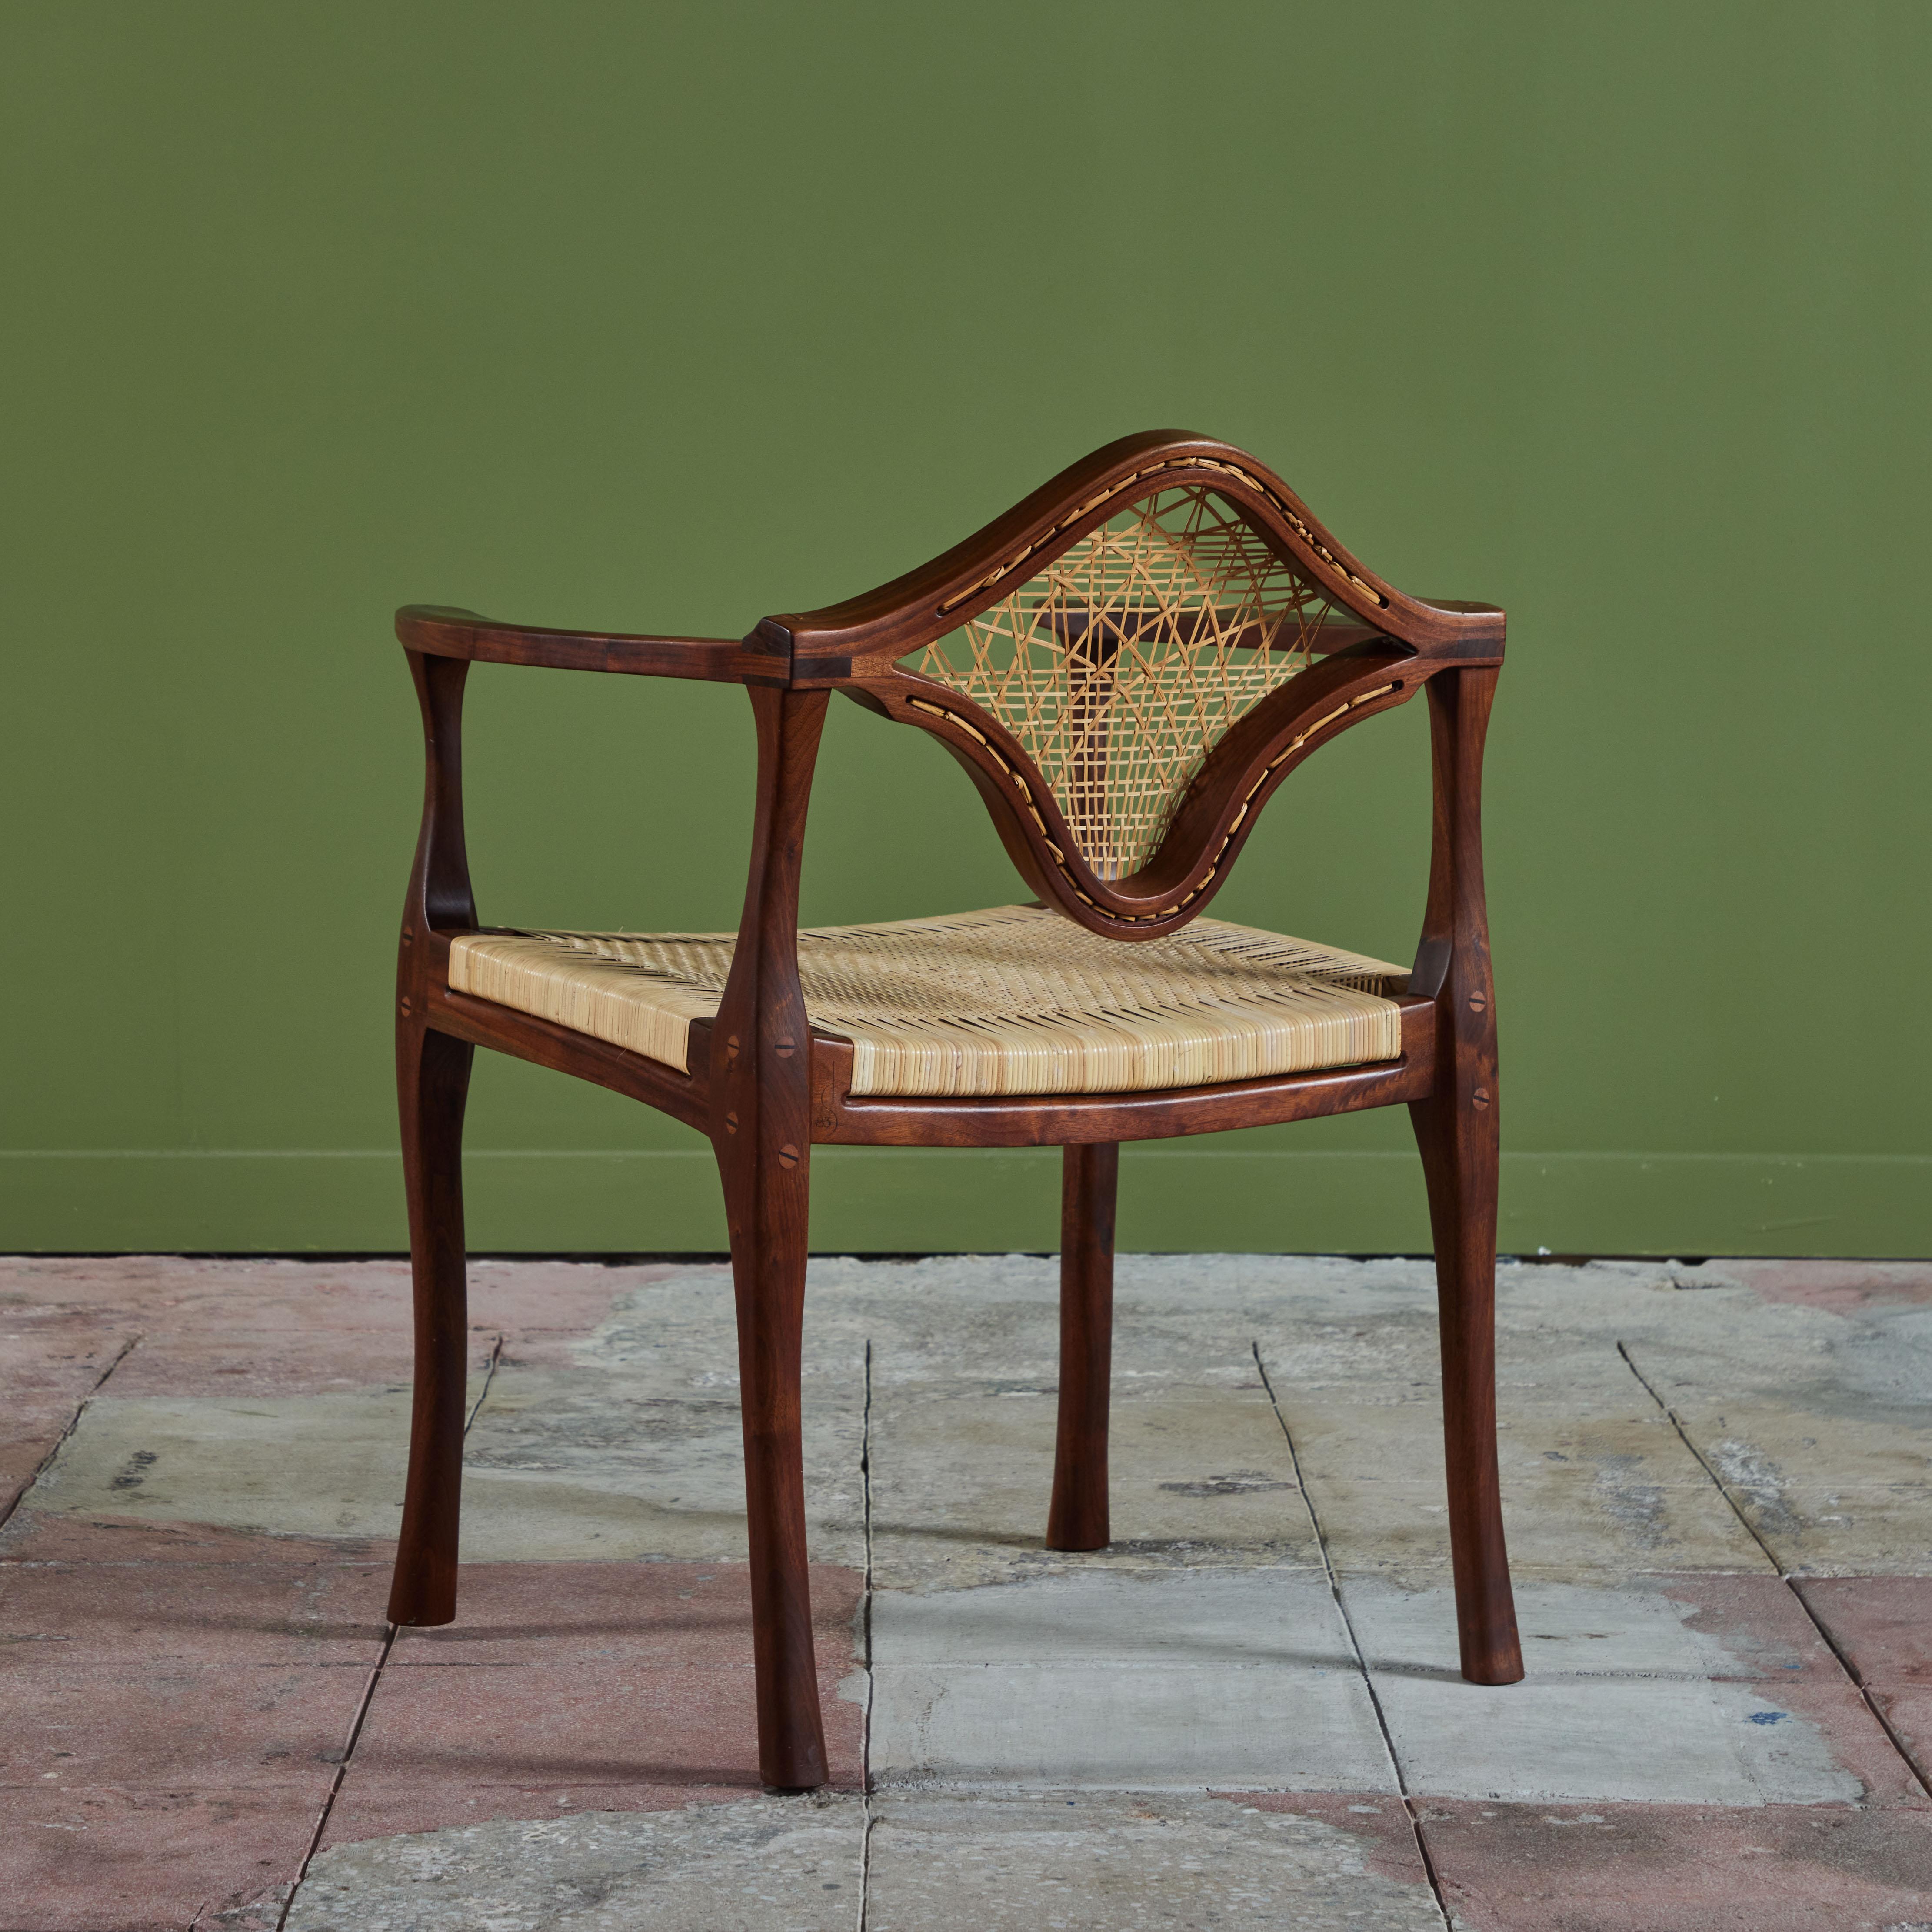 Studio Craft Walnut Armchair with Cane In Excellent Condition For Sale In Los Angeles, CA